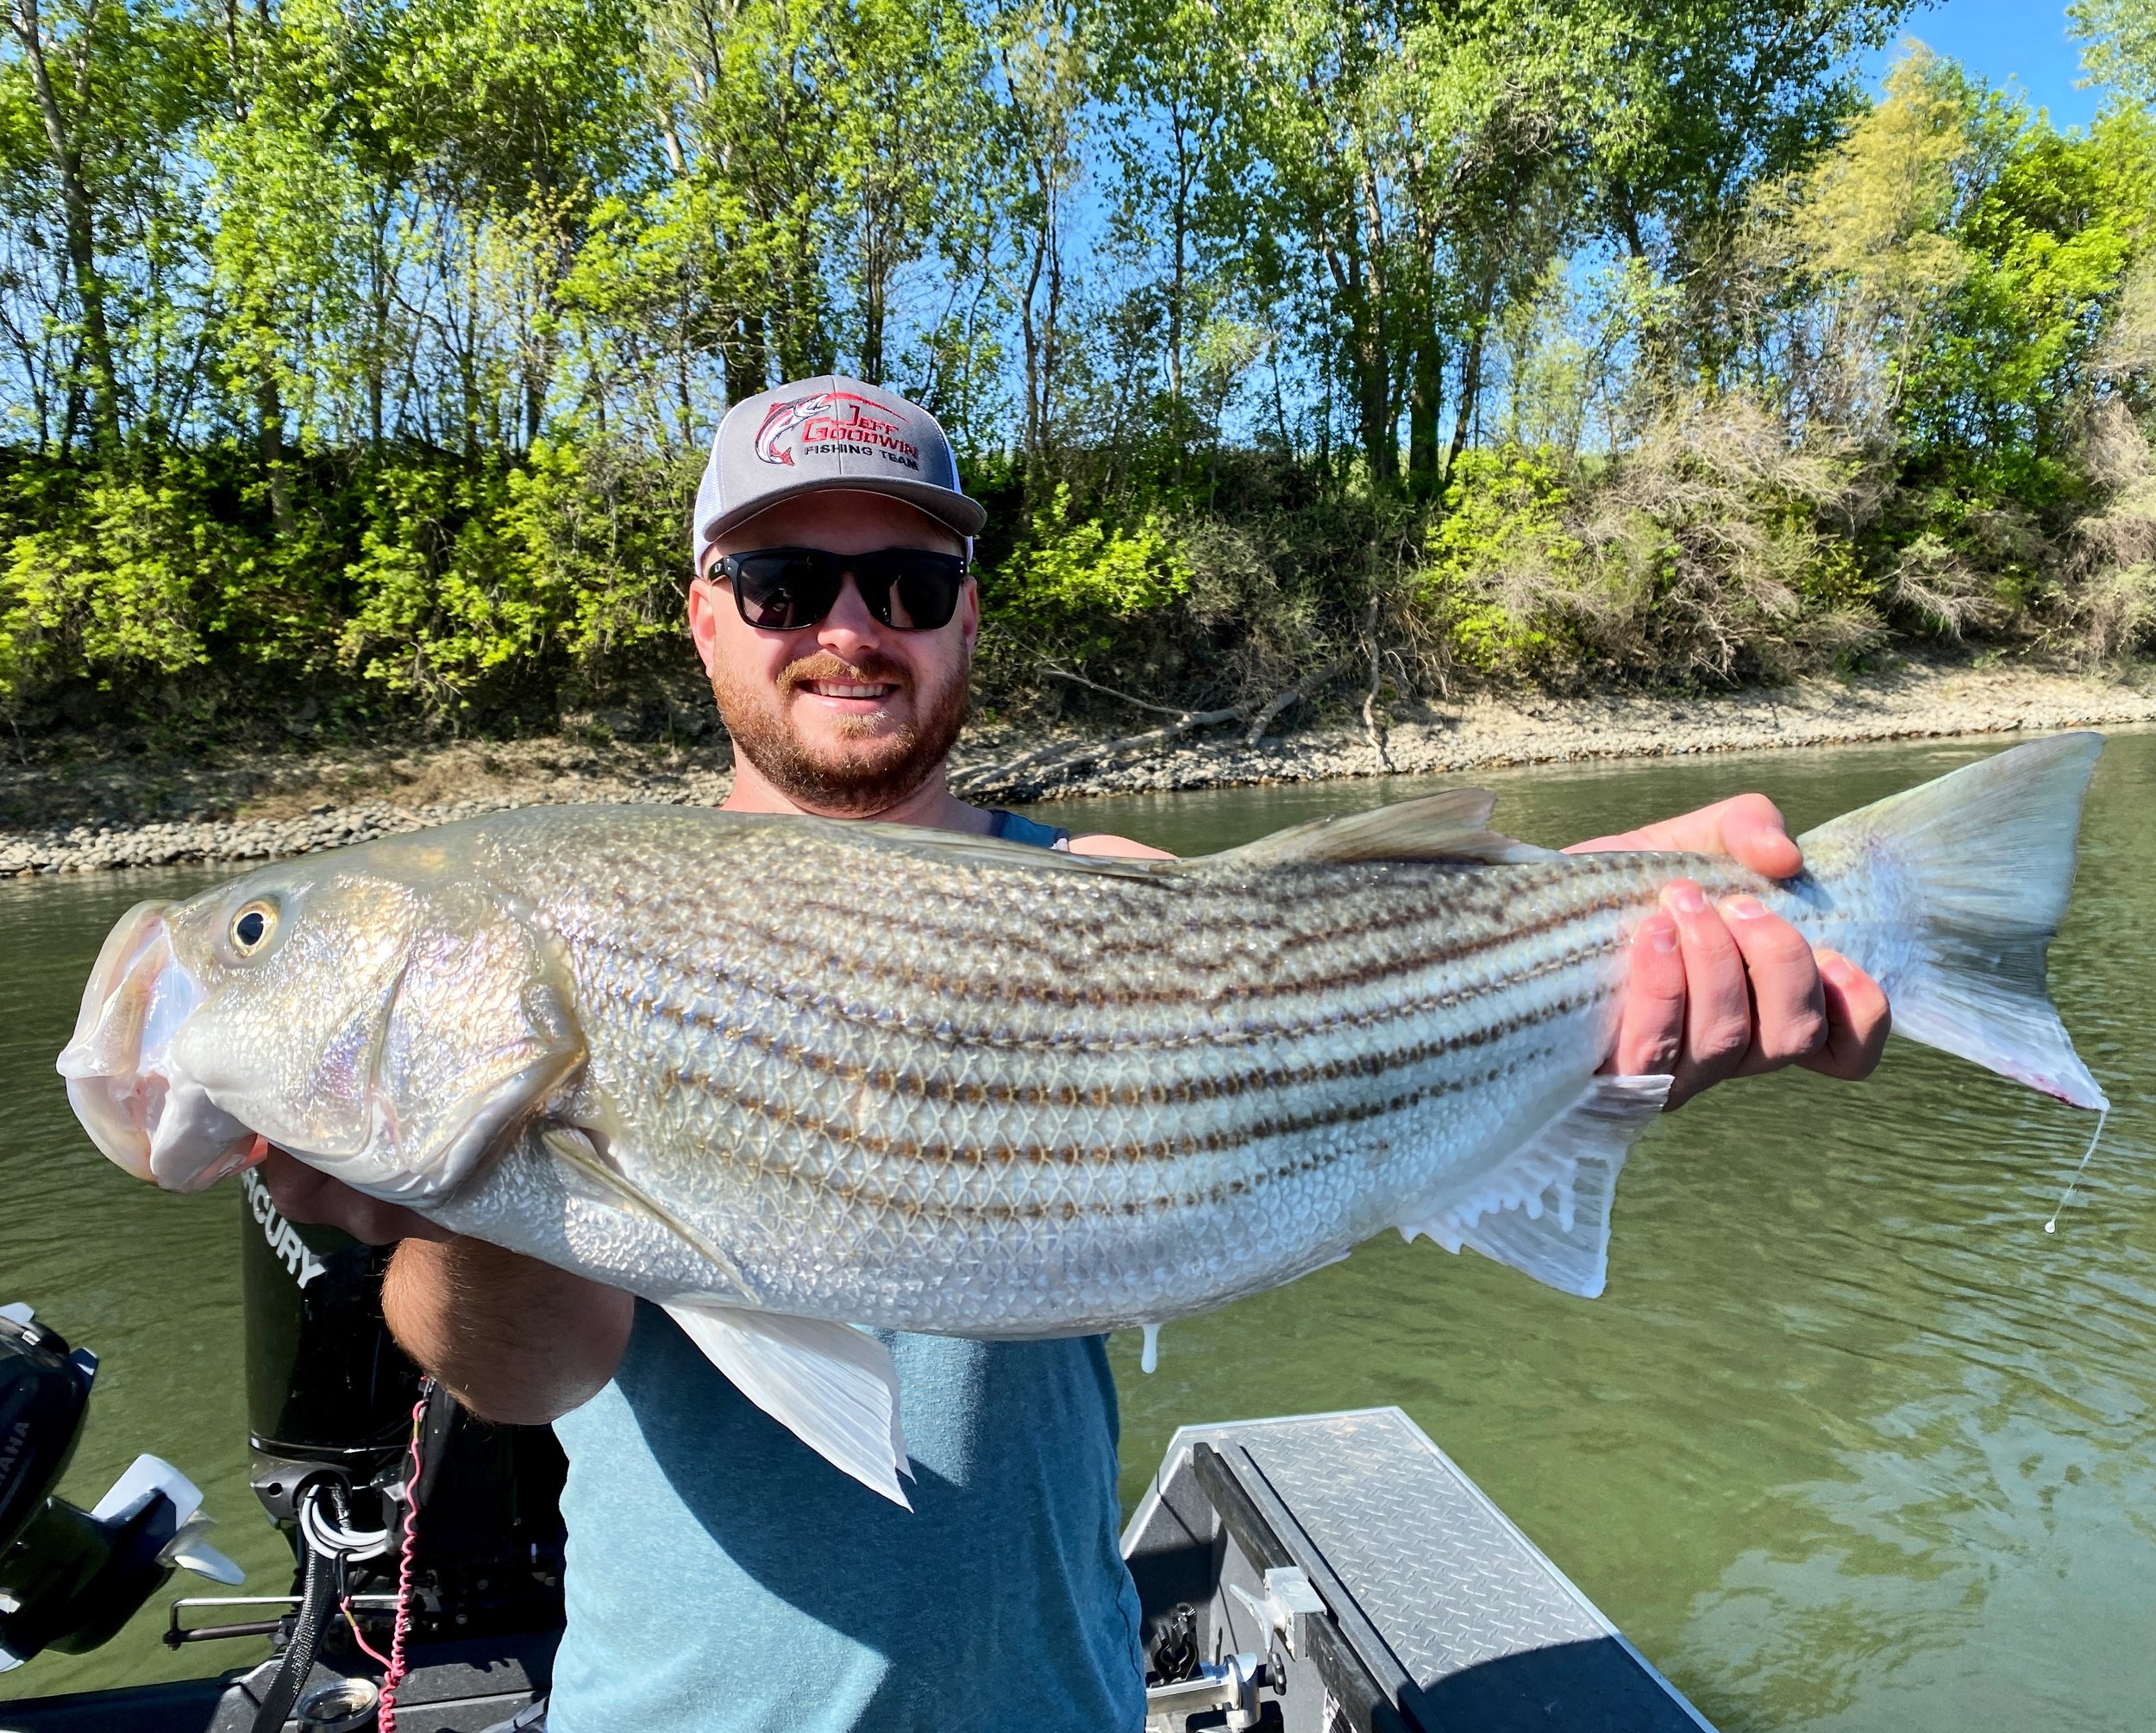 GIANT 48-Inch Striped Bass Caught on the Sacramento River - Active NorCal